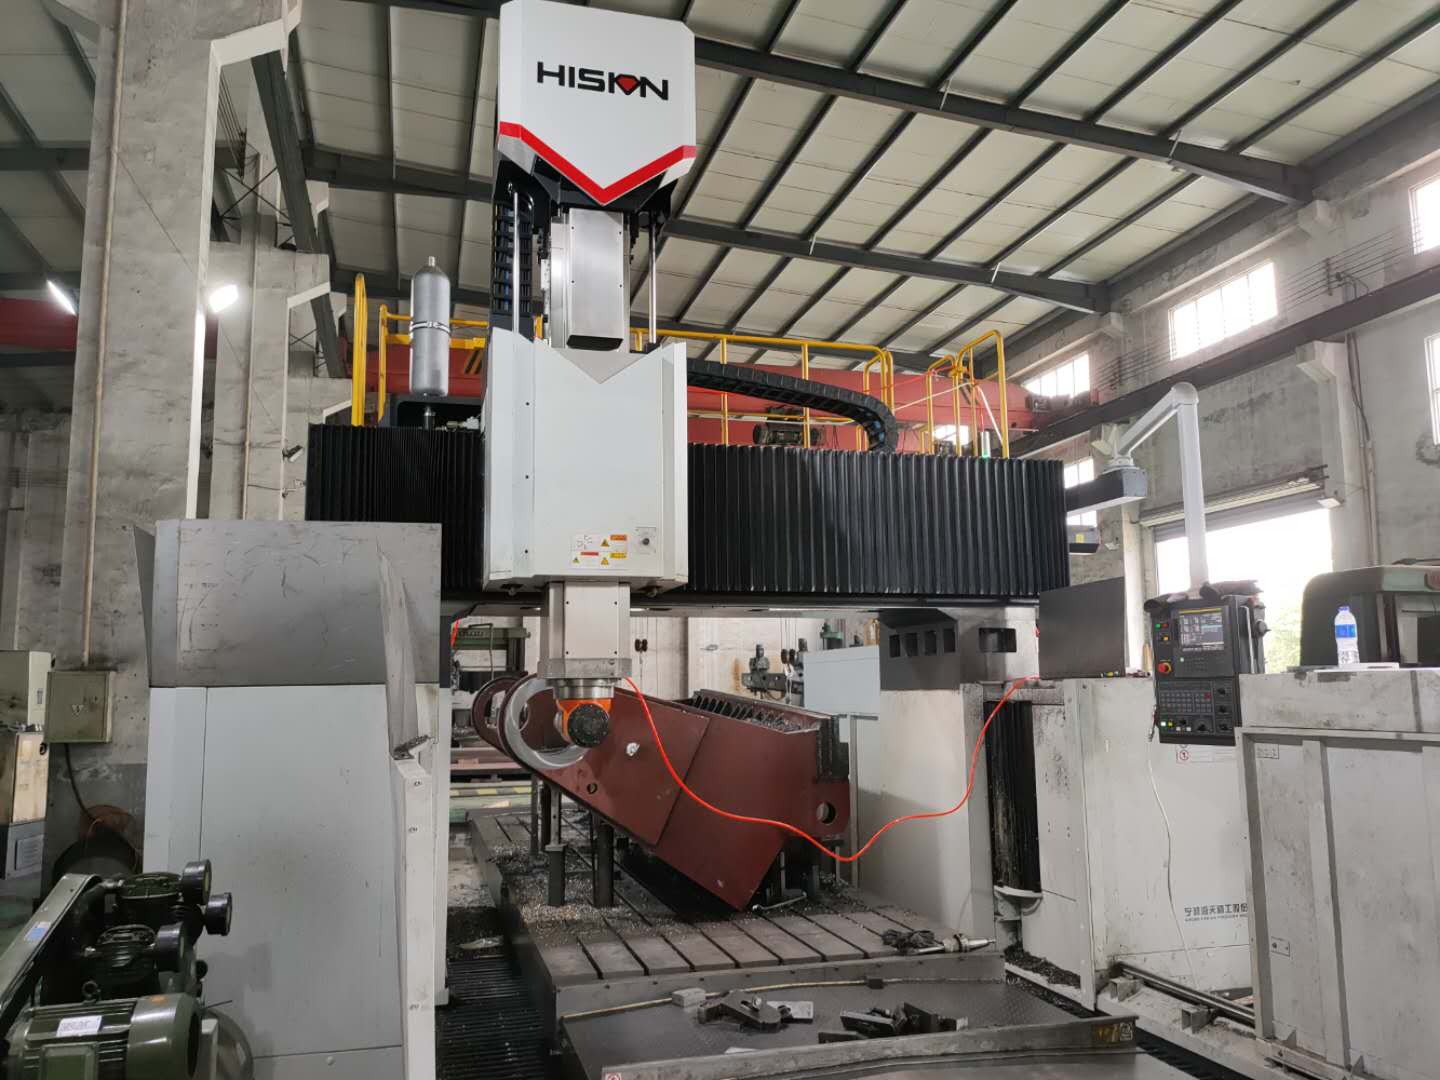 High quality Machining one our machines